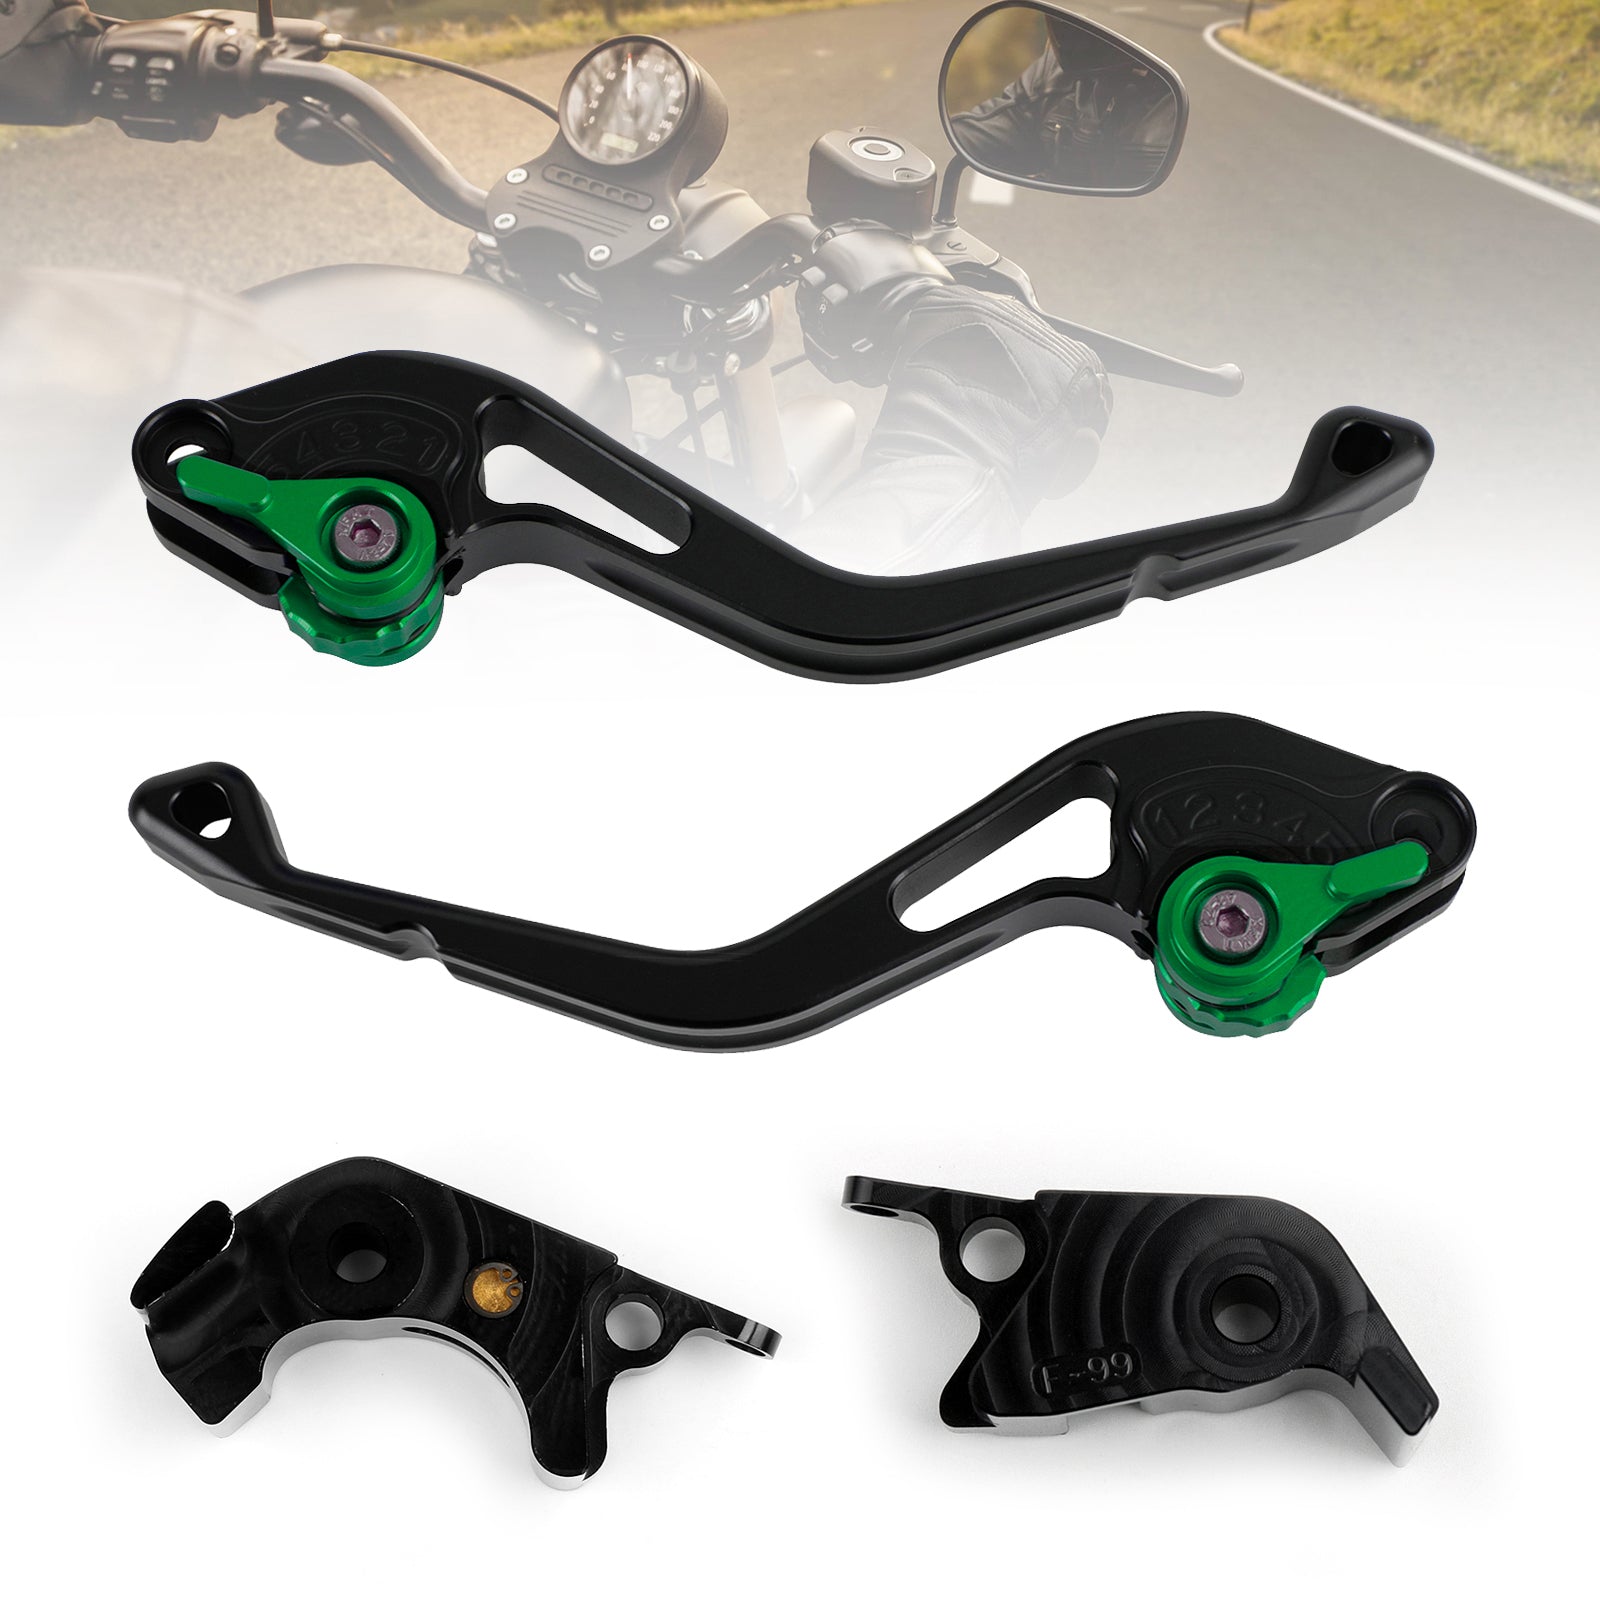 NEW Short Clutch Brake Lever fit for Kawasaki ZZR/ZX1400 SE Version 16-17